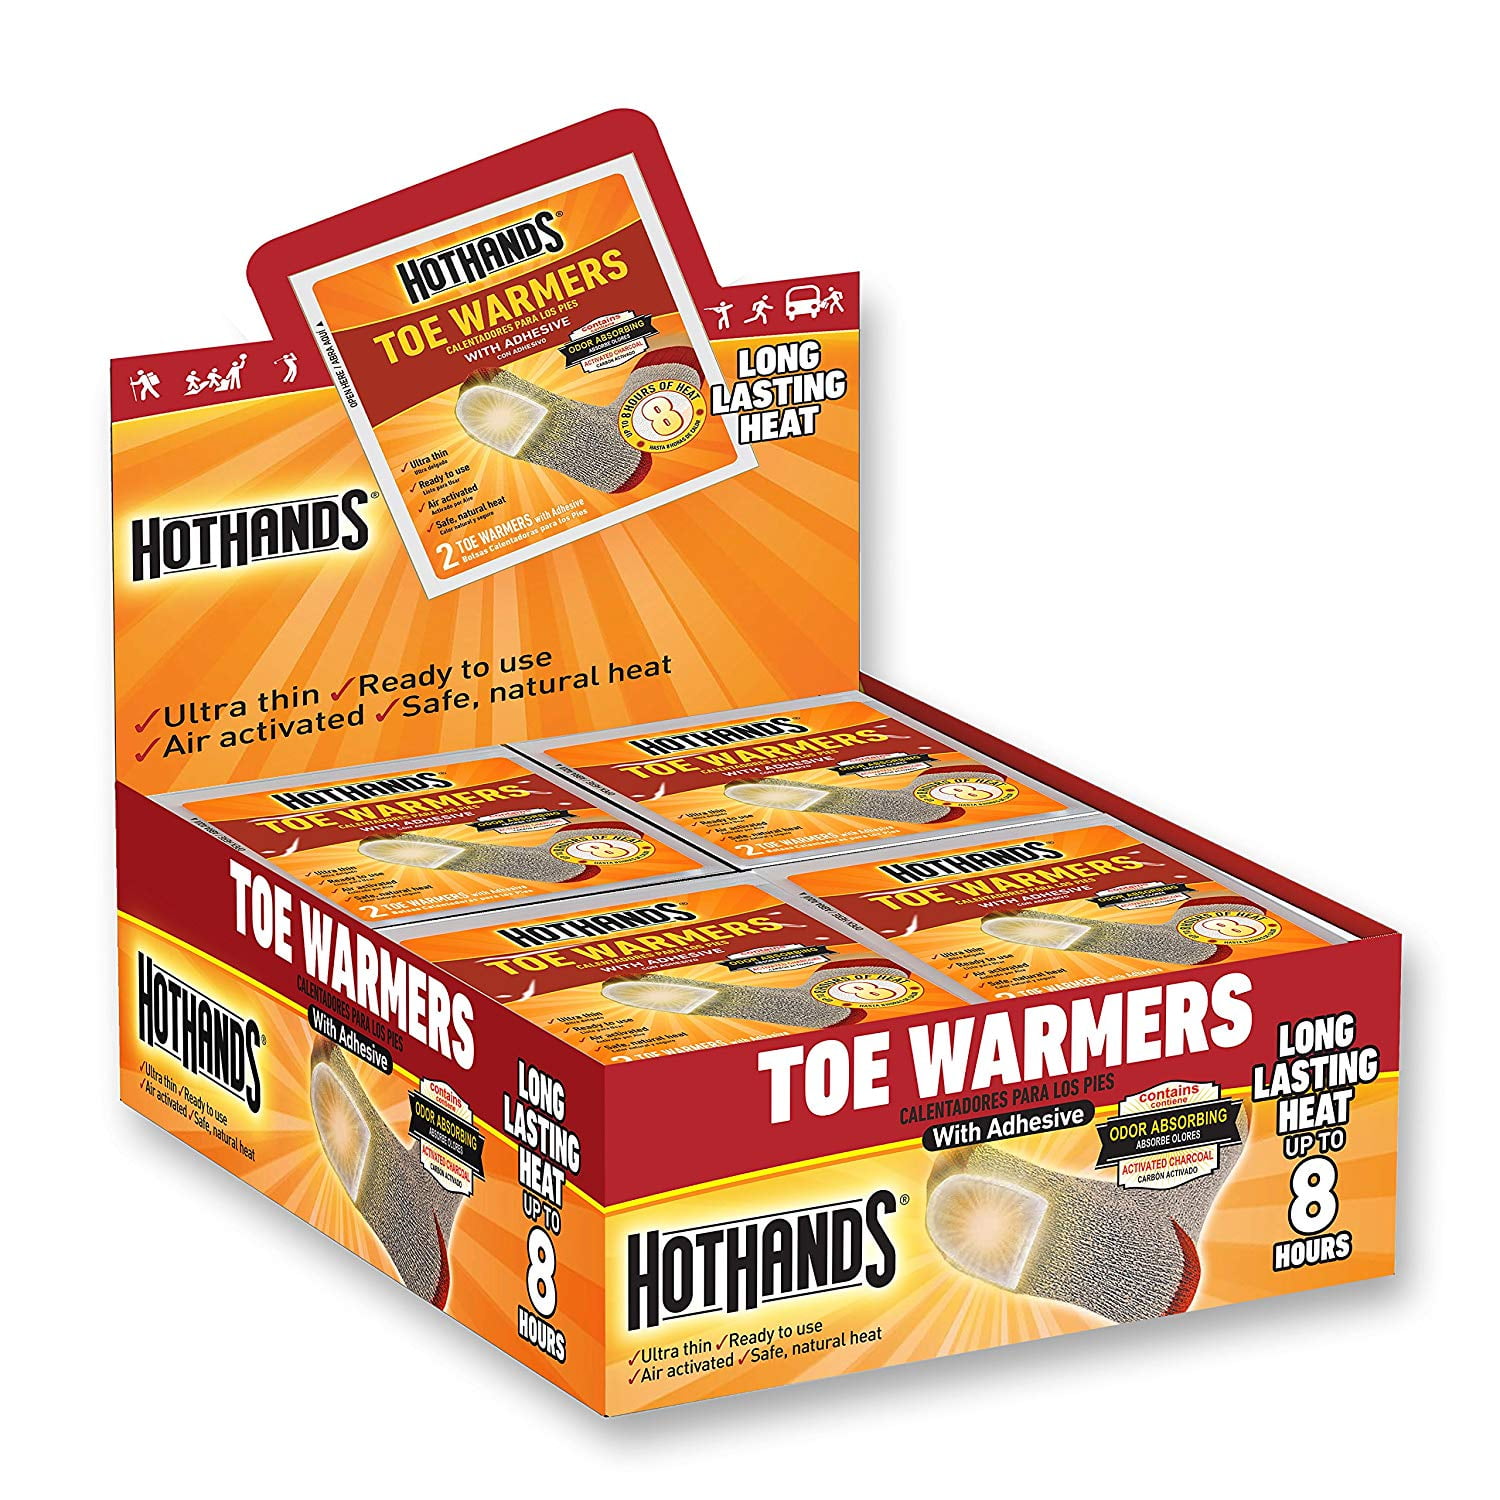 HotHands Toe Warmers Long Lasting Odorless Air Activated Warmers 10 Pairs 